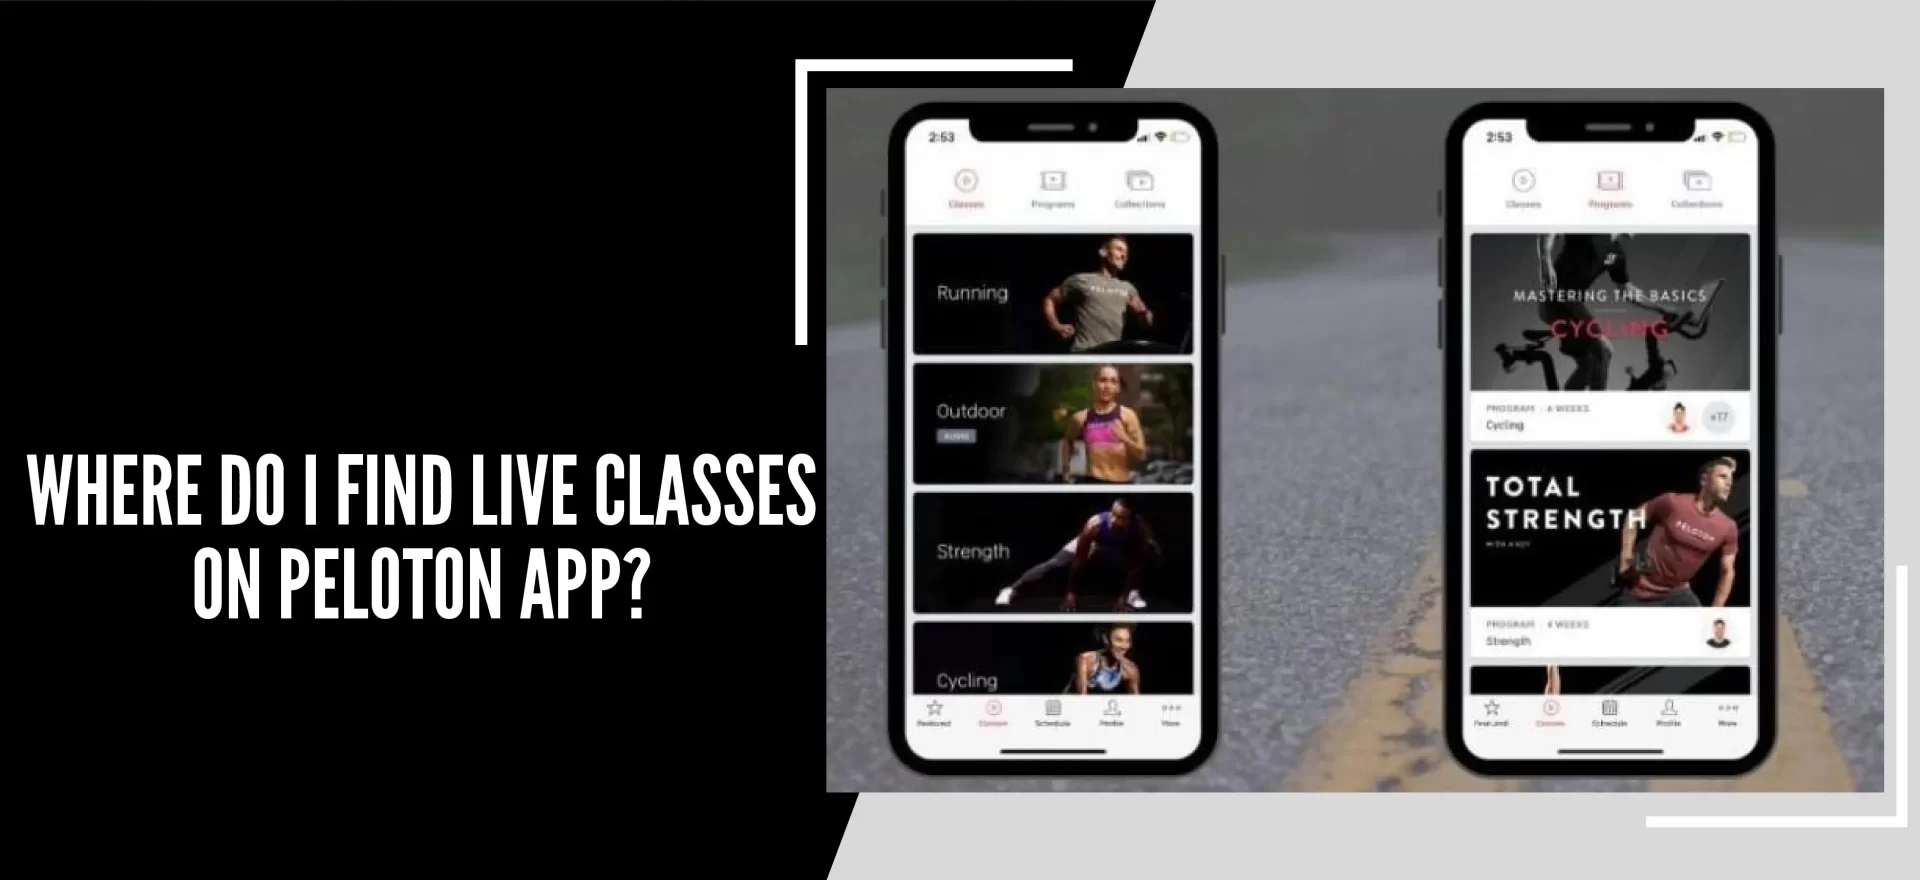 Find Live Classes On Peloton App,how do i find live classes on peloton app,can you get live classes on peloton app,can you see live classes on peloton app,how do you find live classes on the peloton app,Live Classes On Peloton App,live classes peloton apple tv,can you do live classes on peloton app,does the peloton app have live classes,Where Do I Find Live Classes On Peloton App,where to find live classes on peloton app,how to access live classes on peloton app